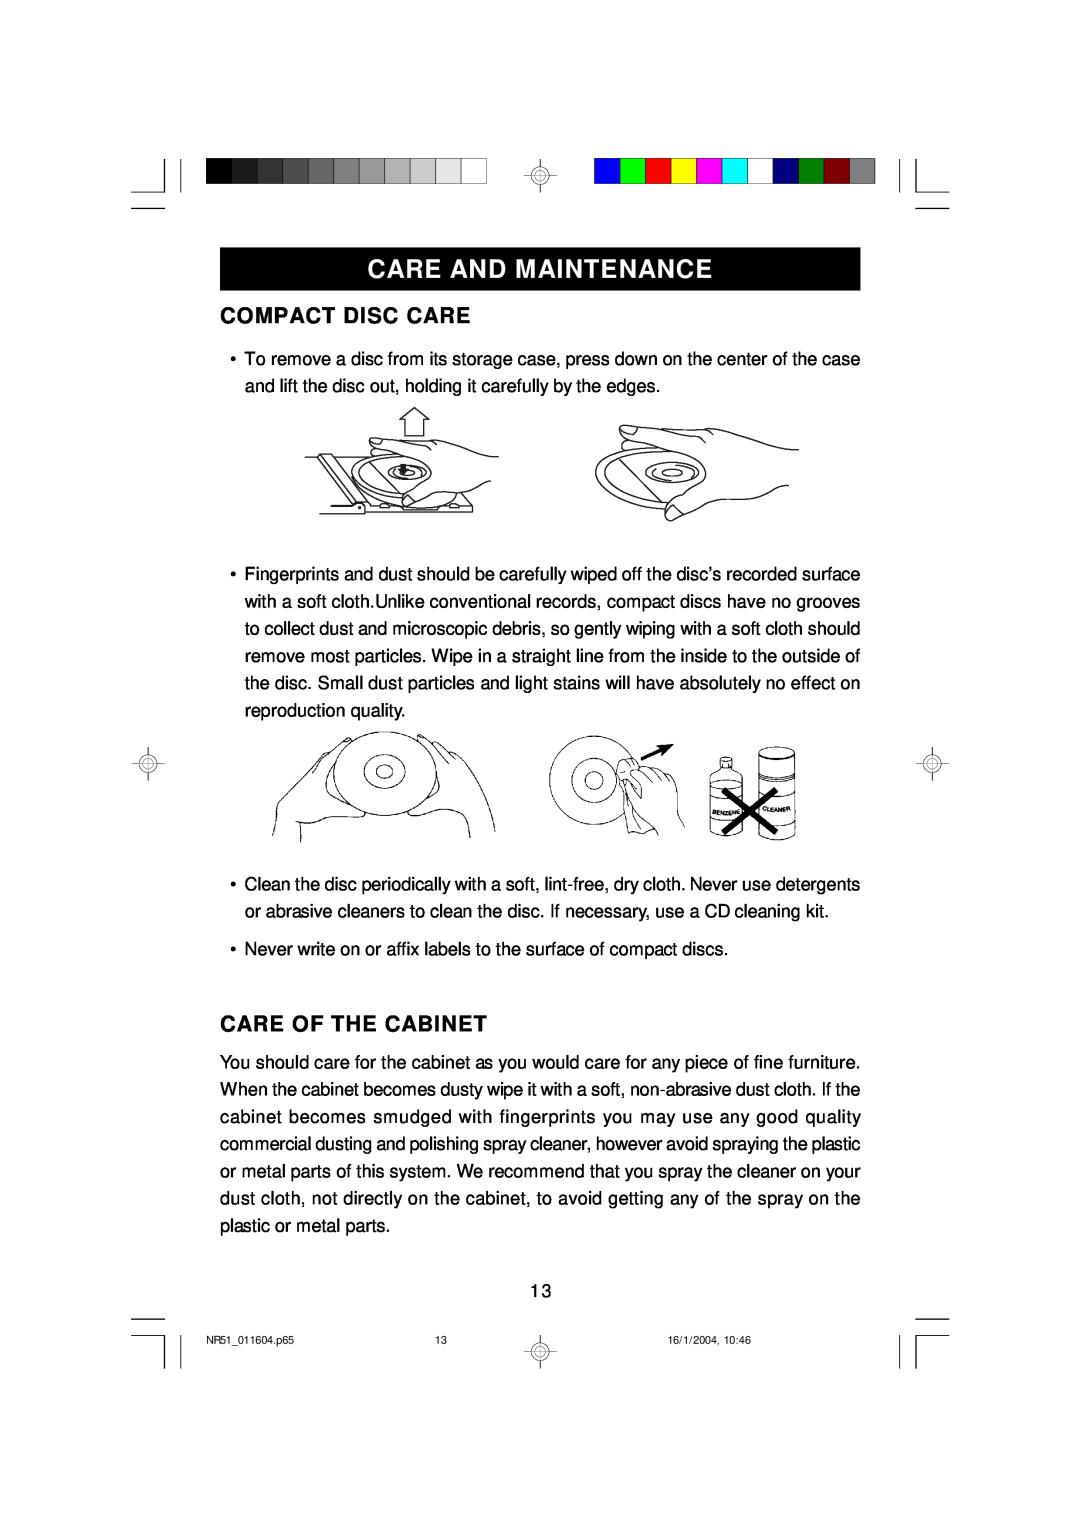 Emerson NR51 owner manual Care And Maintenance, Compact Disc Care, Care Of The Cabinet 